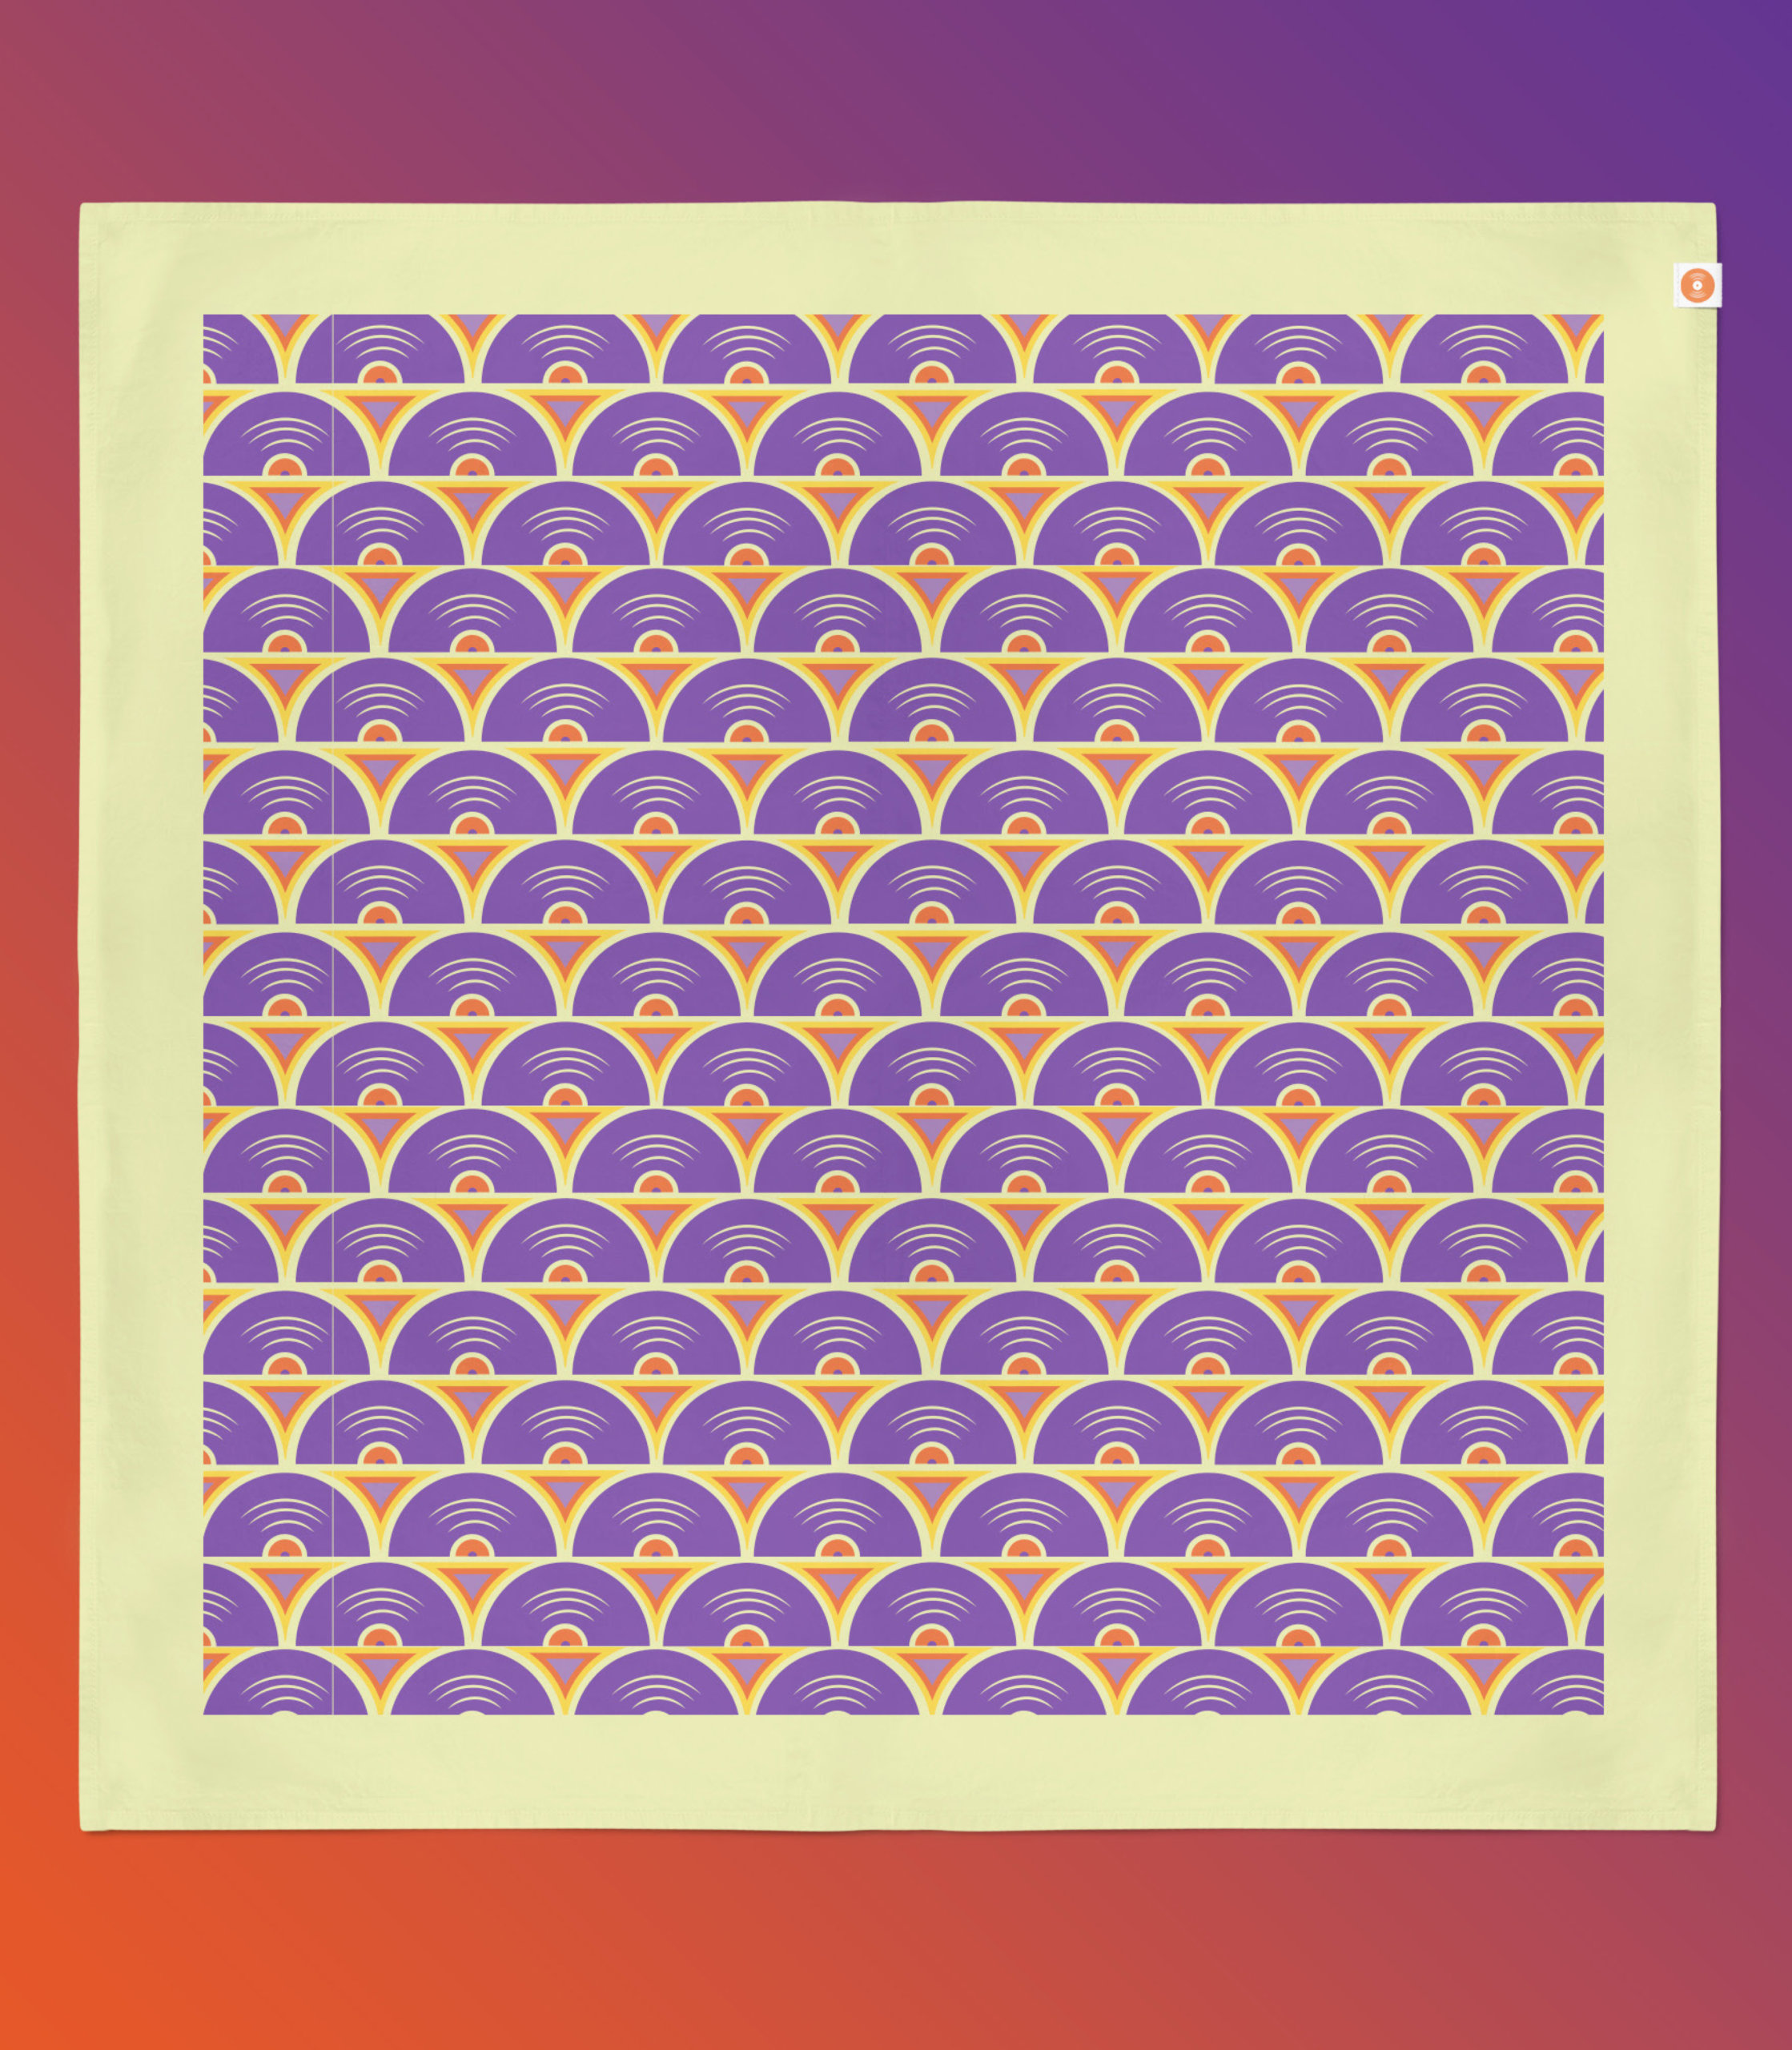 A square bandana with a pattern made up of lines of purple records and a melon colored border around the outside of the bandana.